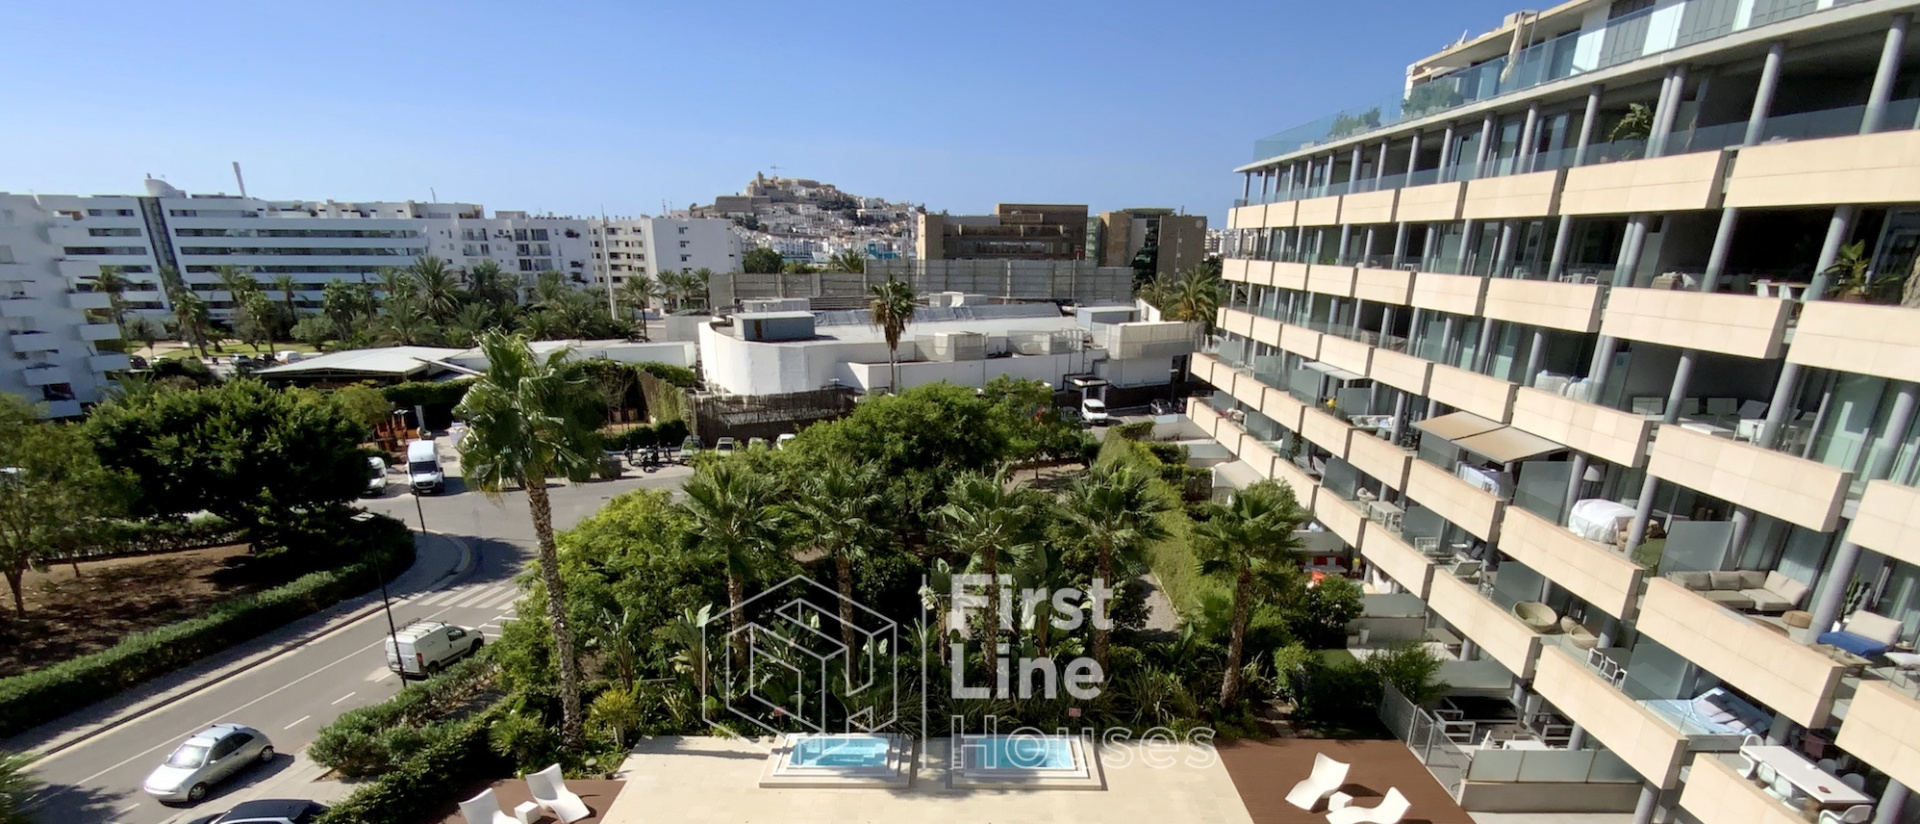 Spectacular luxury apartment for sale with views of Ibiza Town